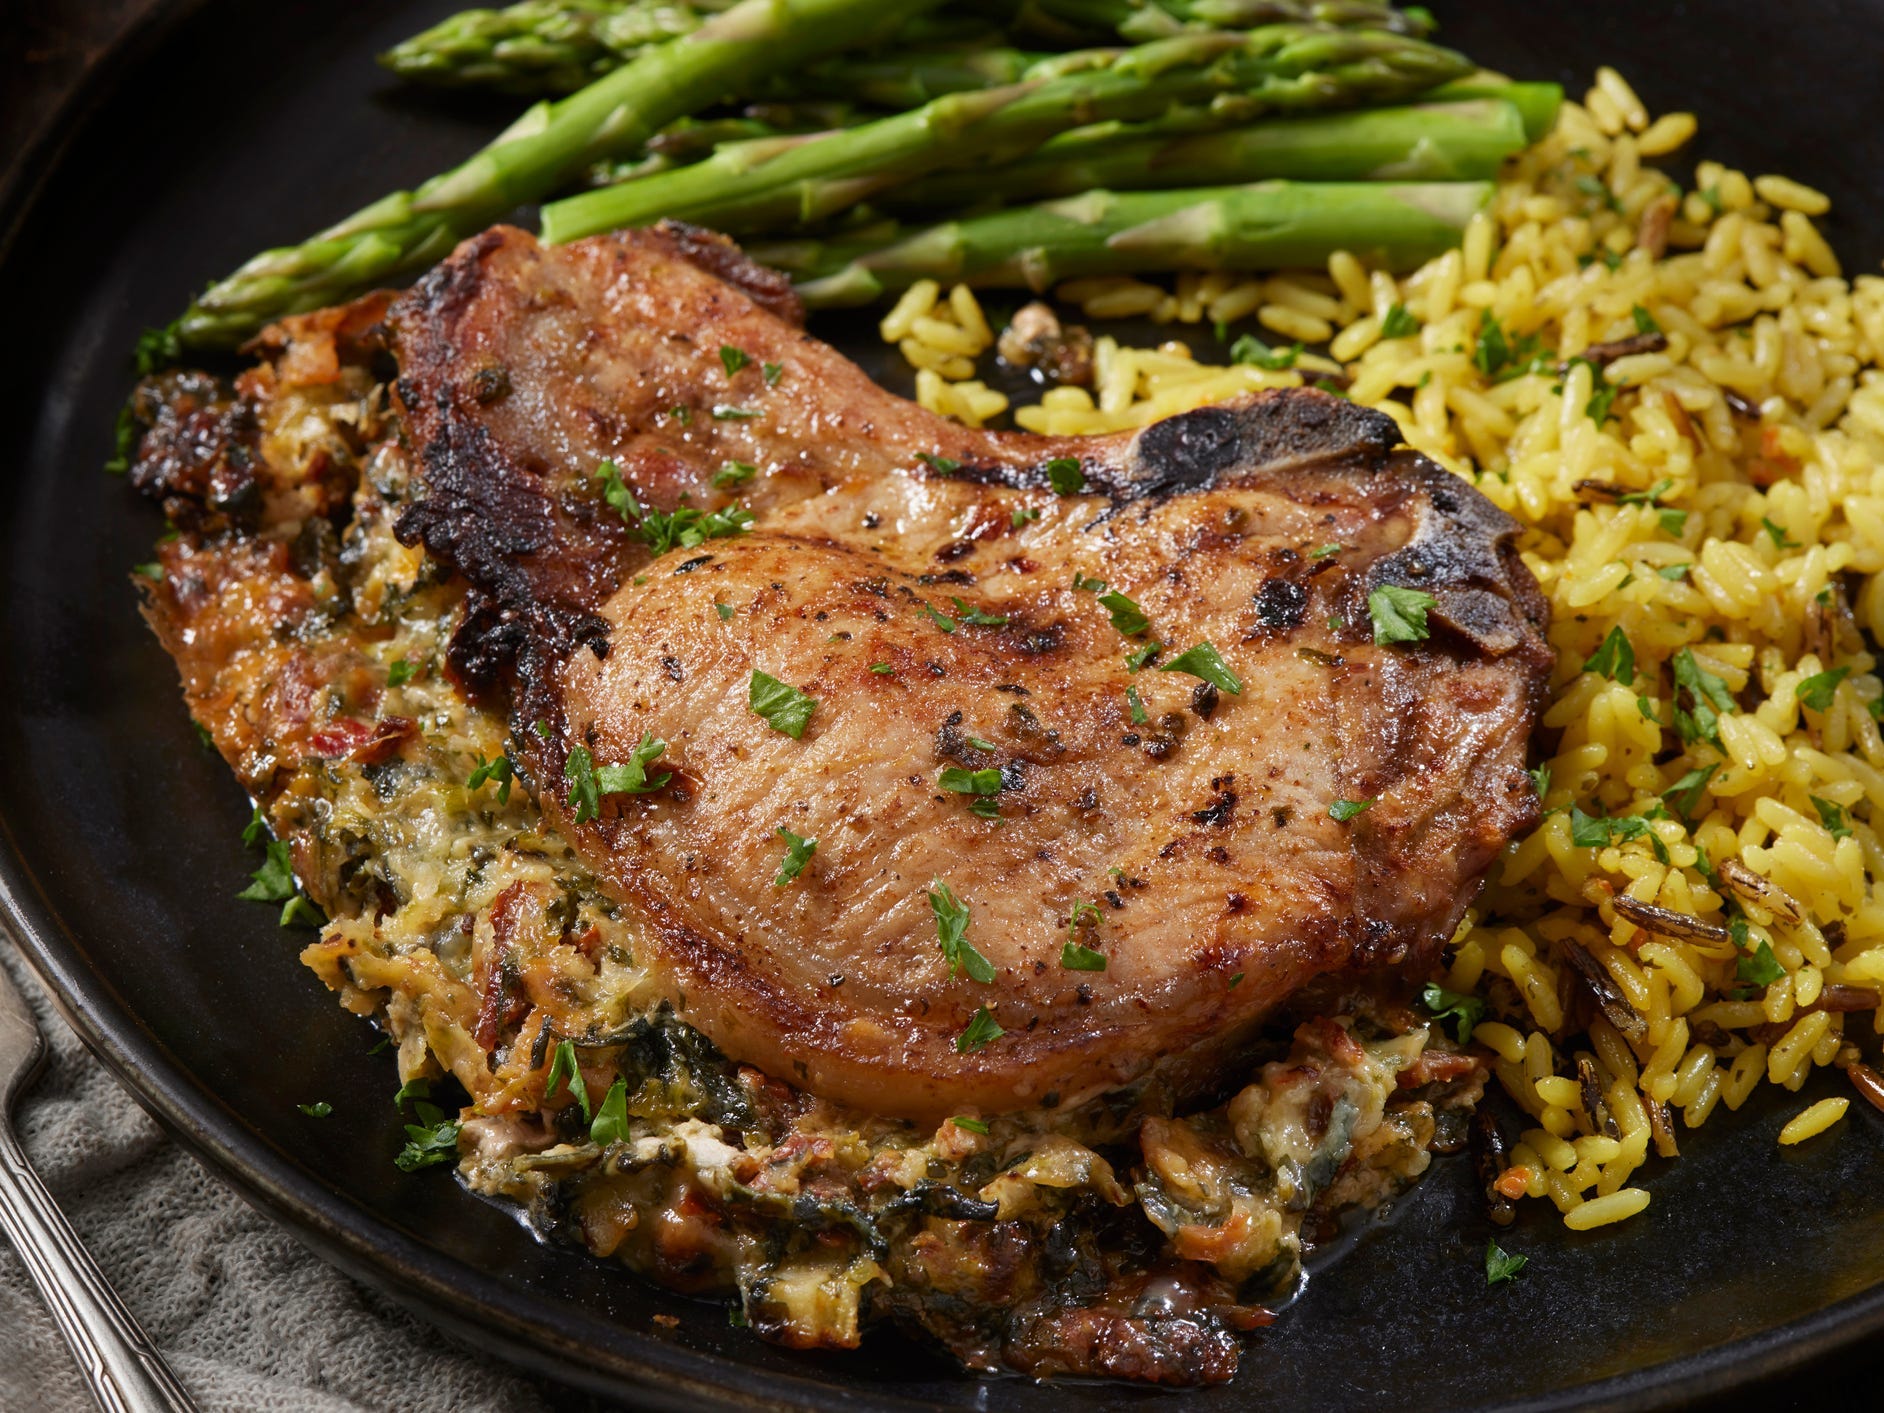 A pork chop on a bed of yellow rice with a side of asparagus